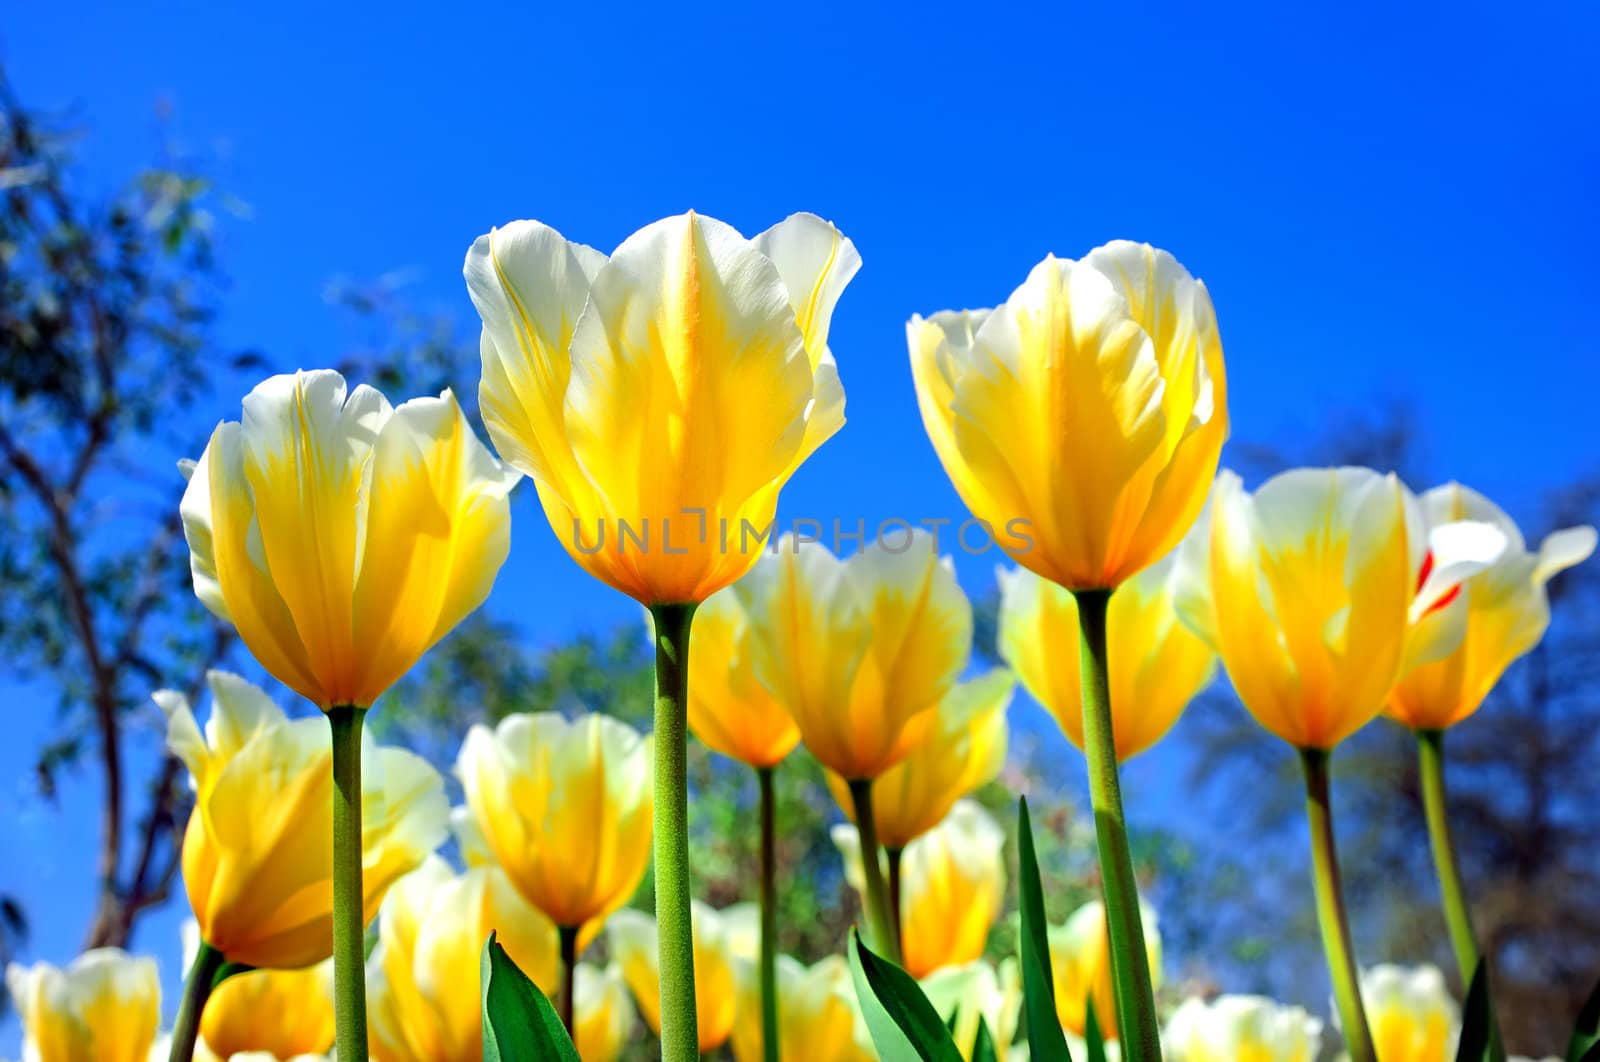 bright yellow tulips against the blue sky on a sunny day